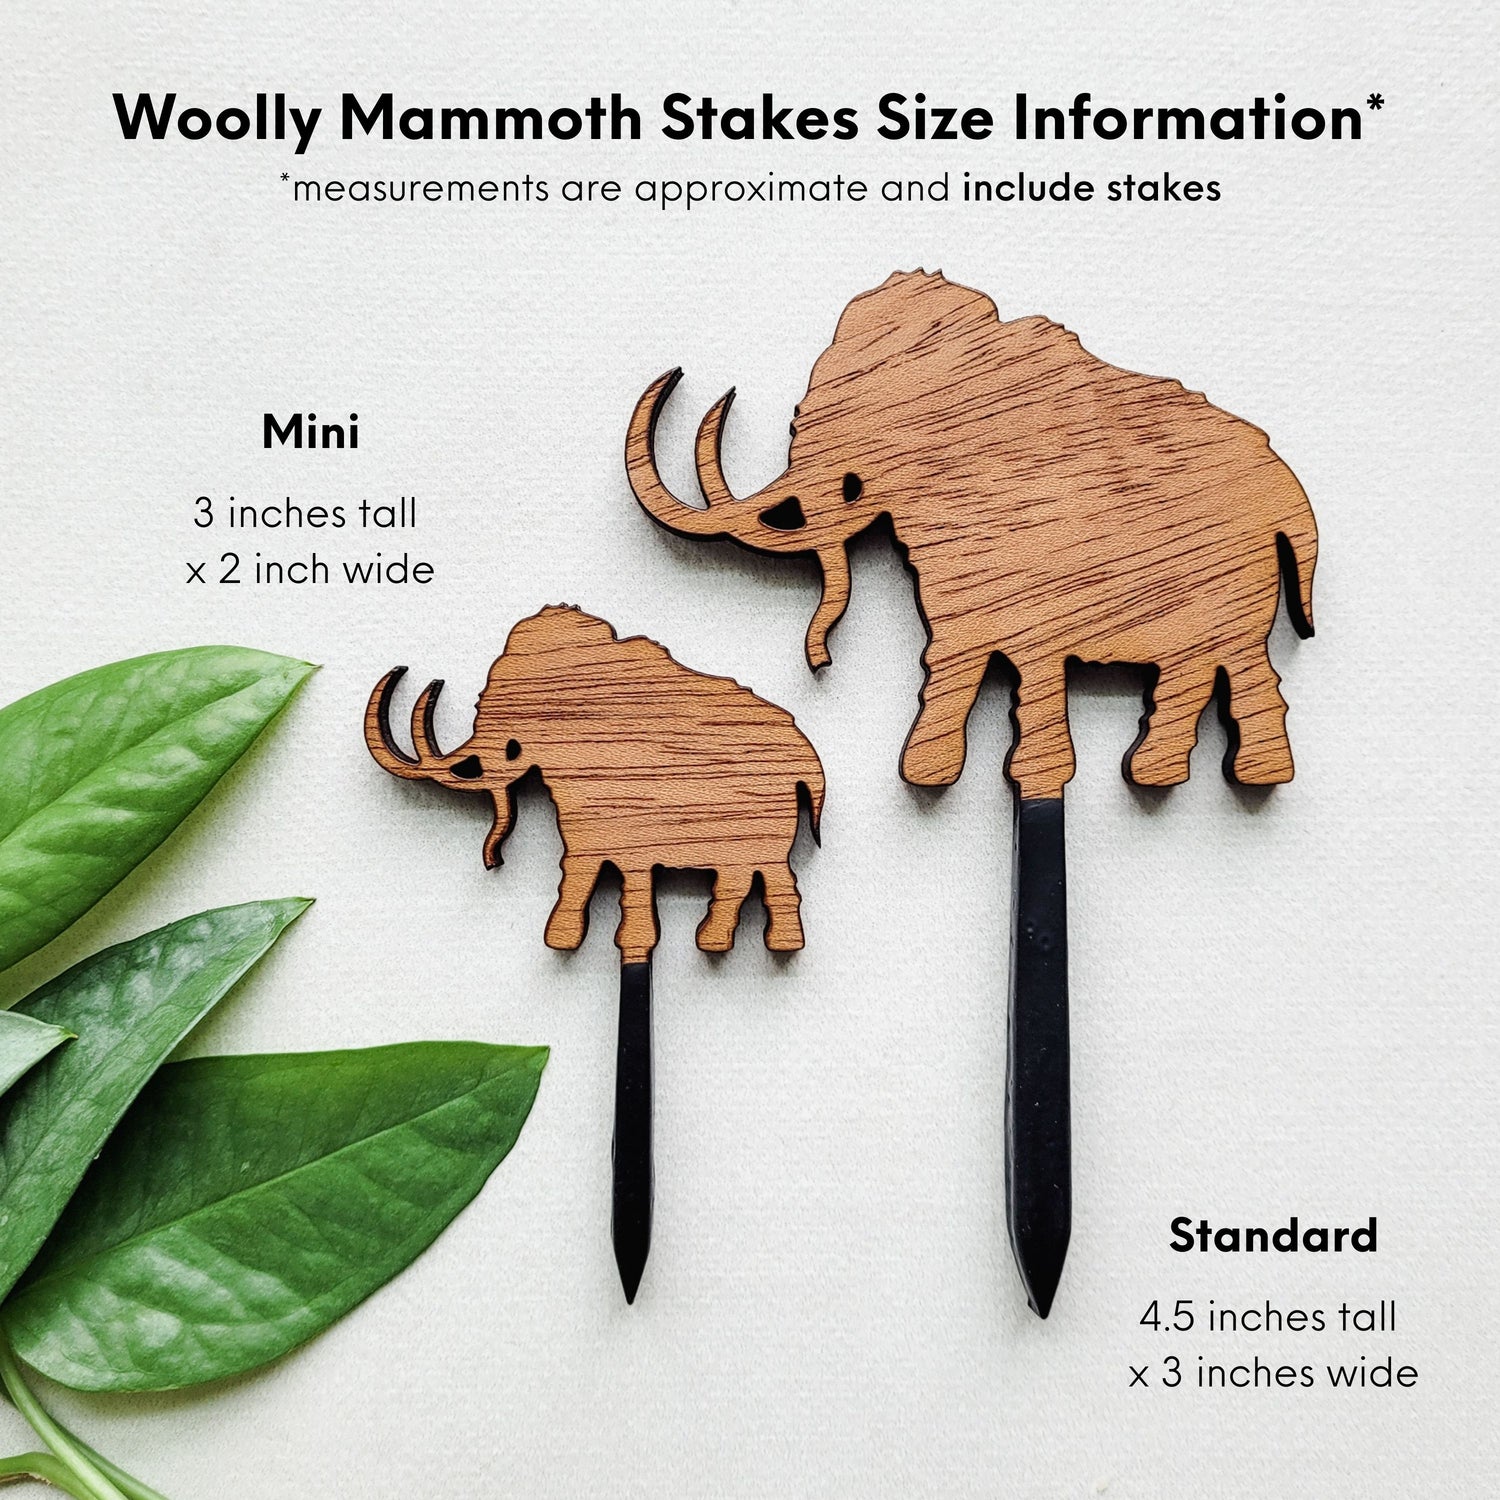 Standard and Mini wooden Woolly Mammoth plant stakes on white background with size information that matches the written description.